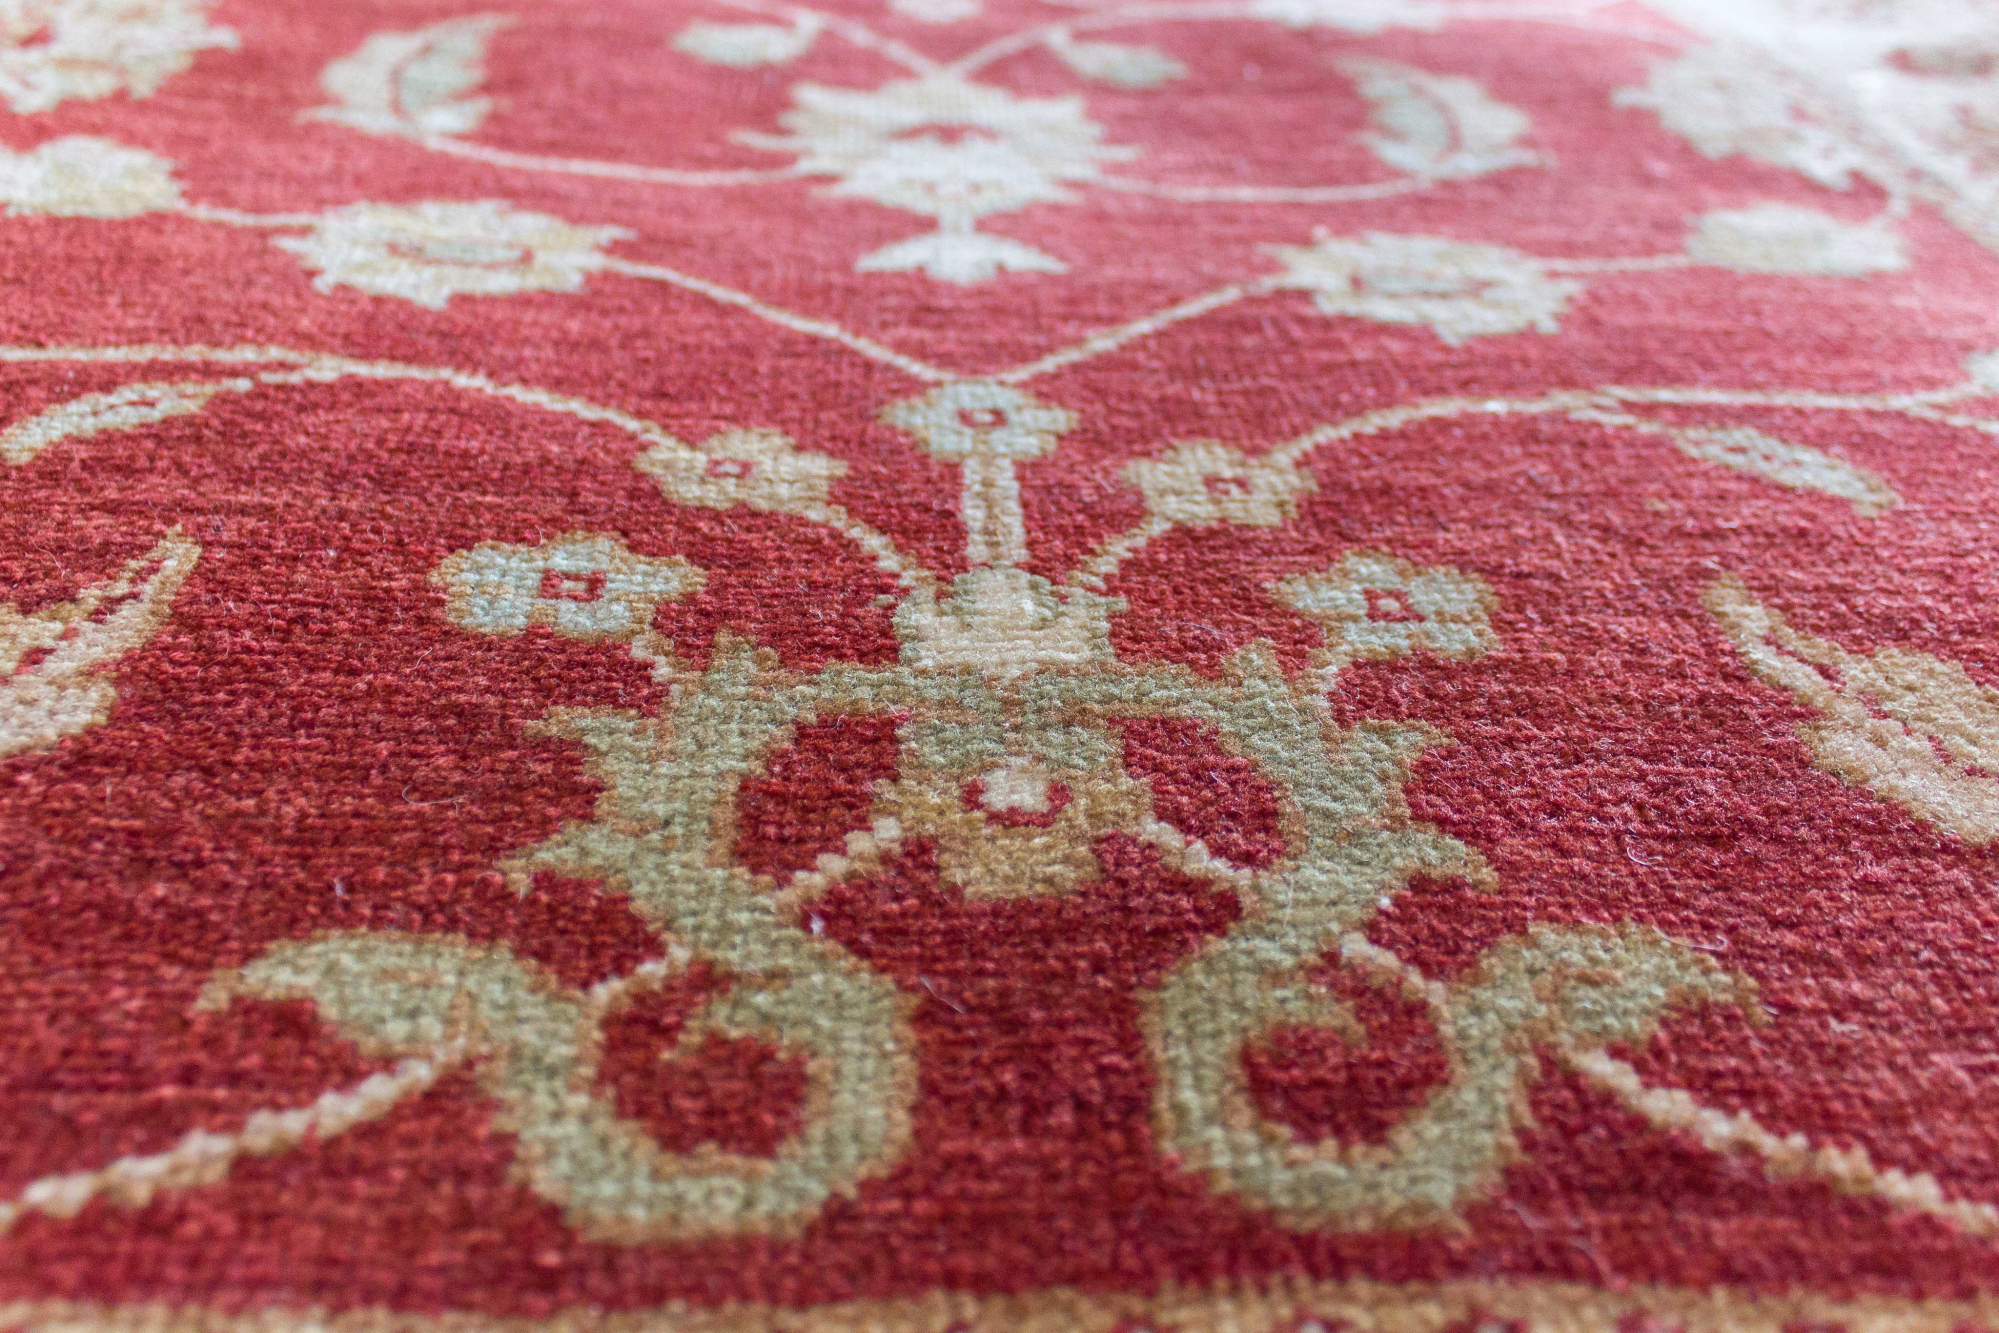 Area rug for living space and any room. Floor decor, rugs and carpets from Tabrizi Rugs. Himalaya 3'0